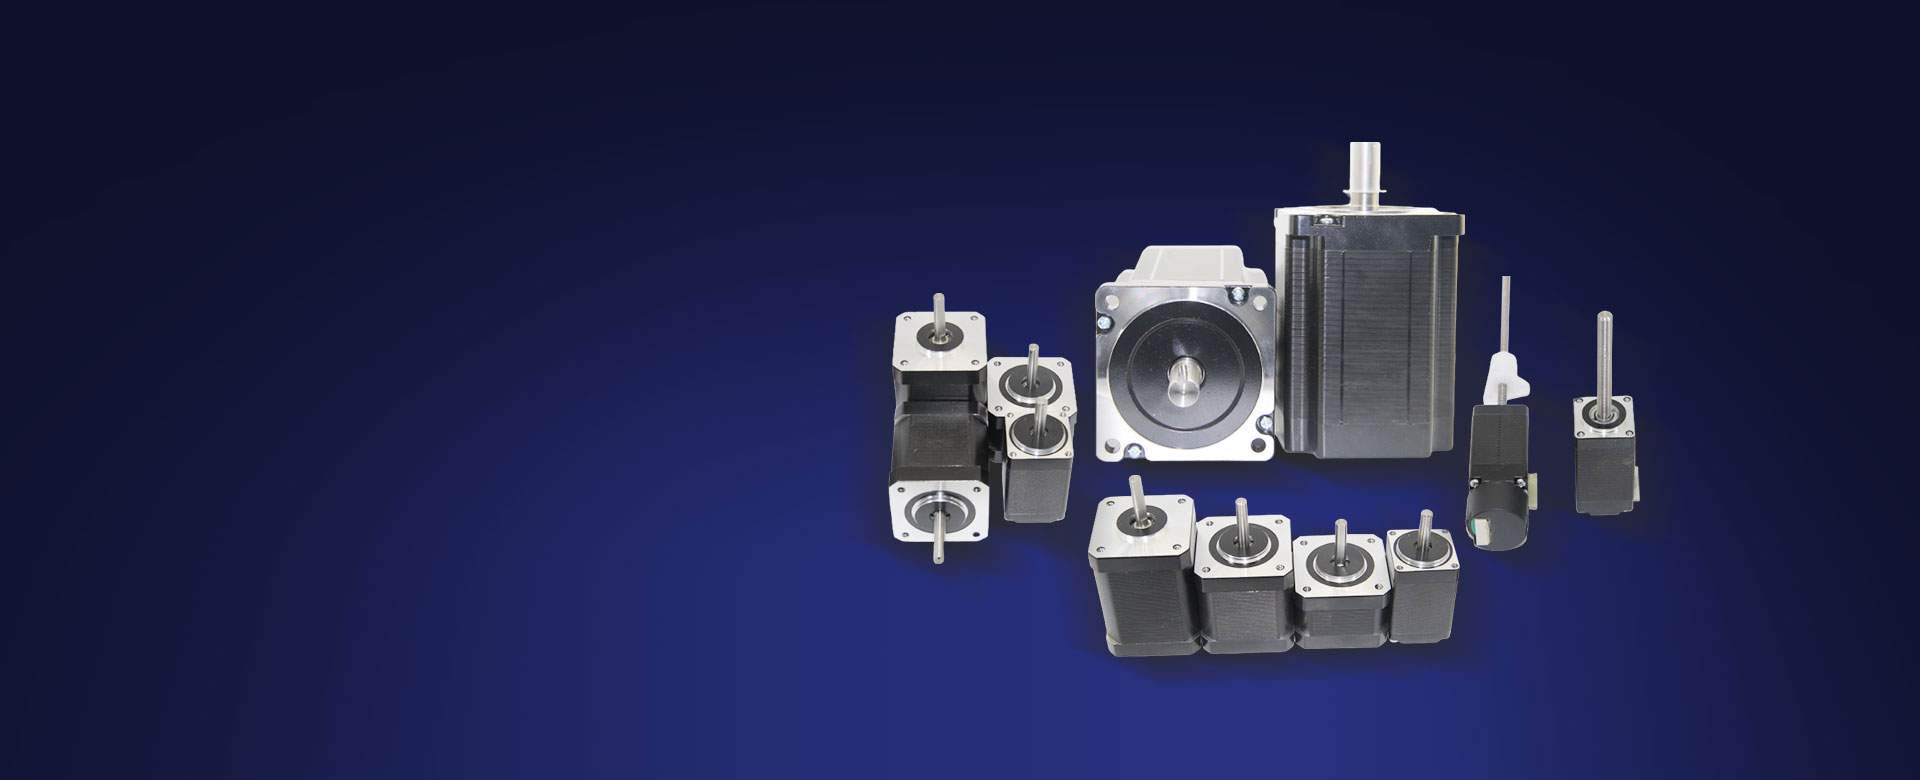 Stepper motor, easy to control the mechanical operation, make your equipment more intelligent! 